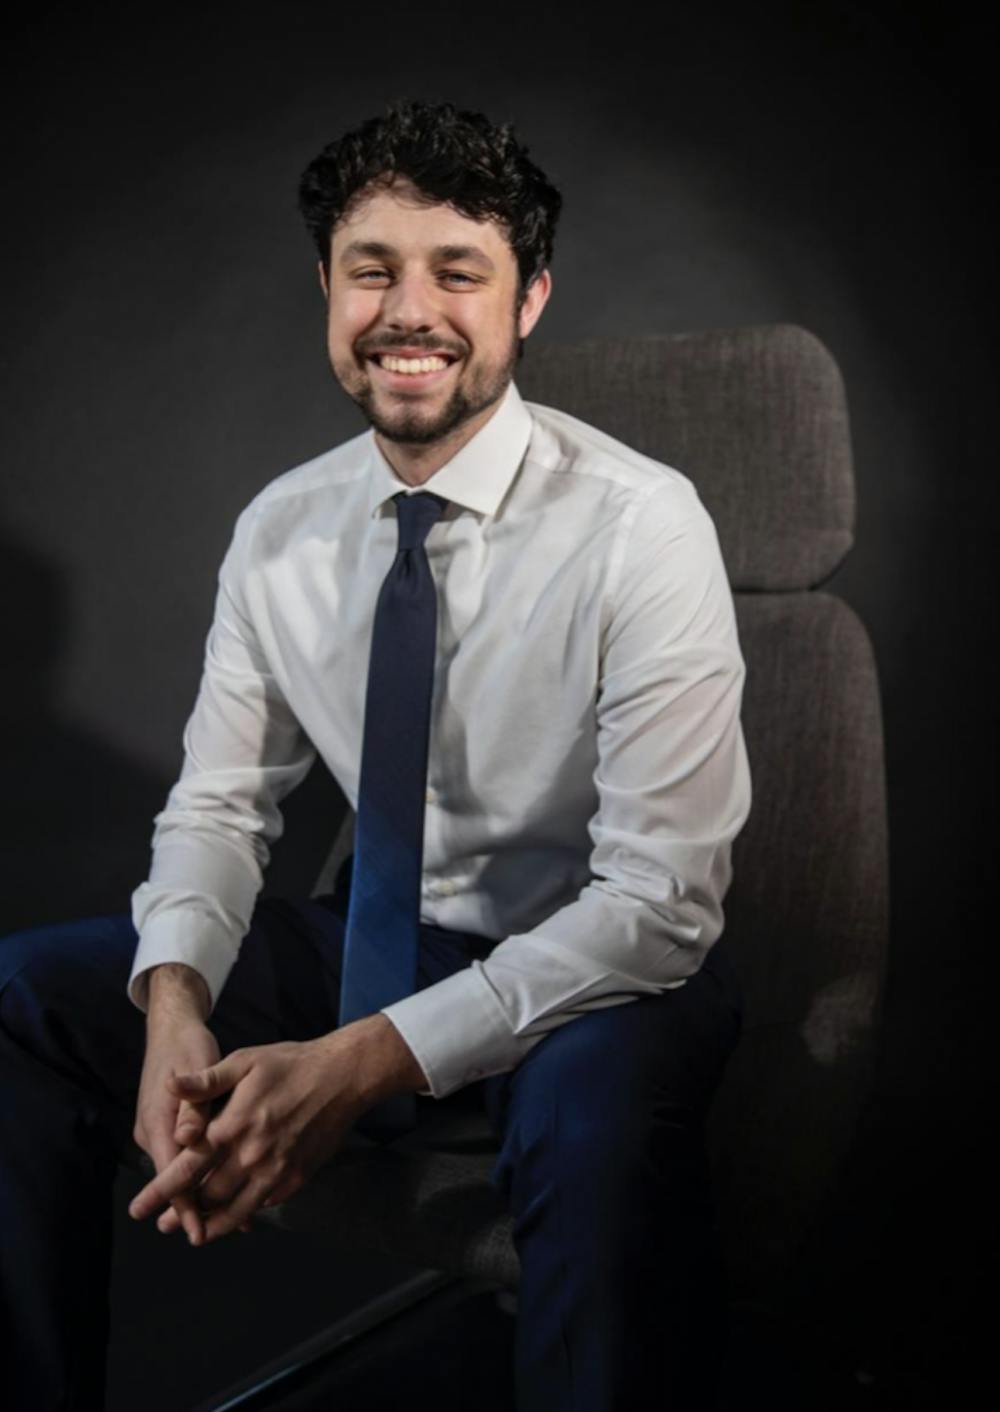 <p><span>Lucas Finton is the editor-in-chief of the Daily Helmsman and can be reached at lmfinton@memphis.edu.</span></p>